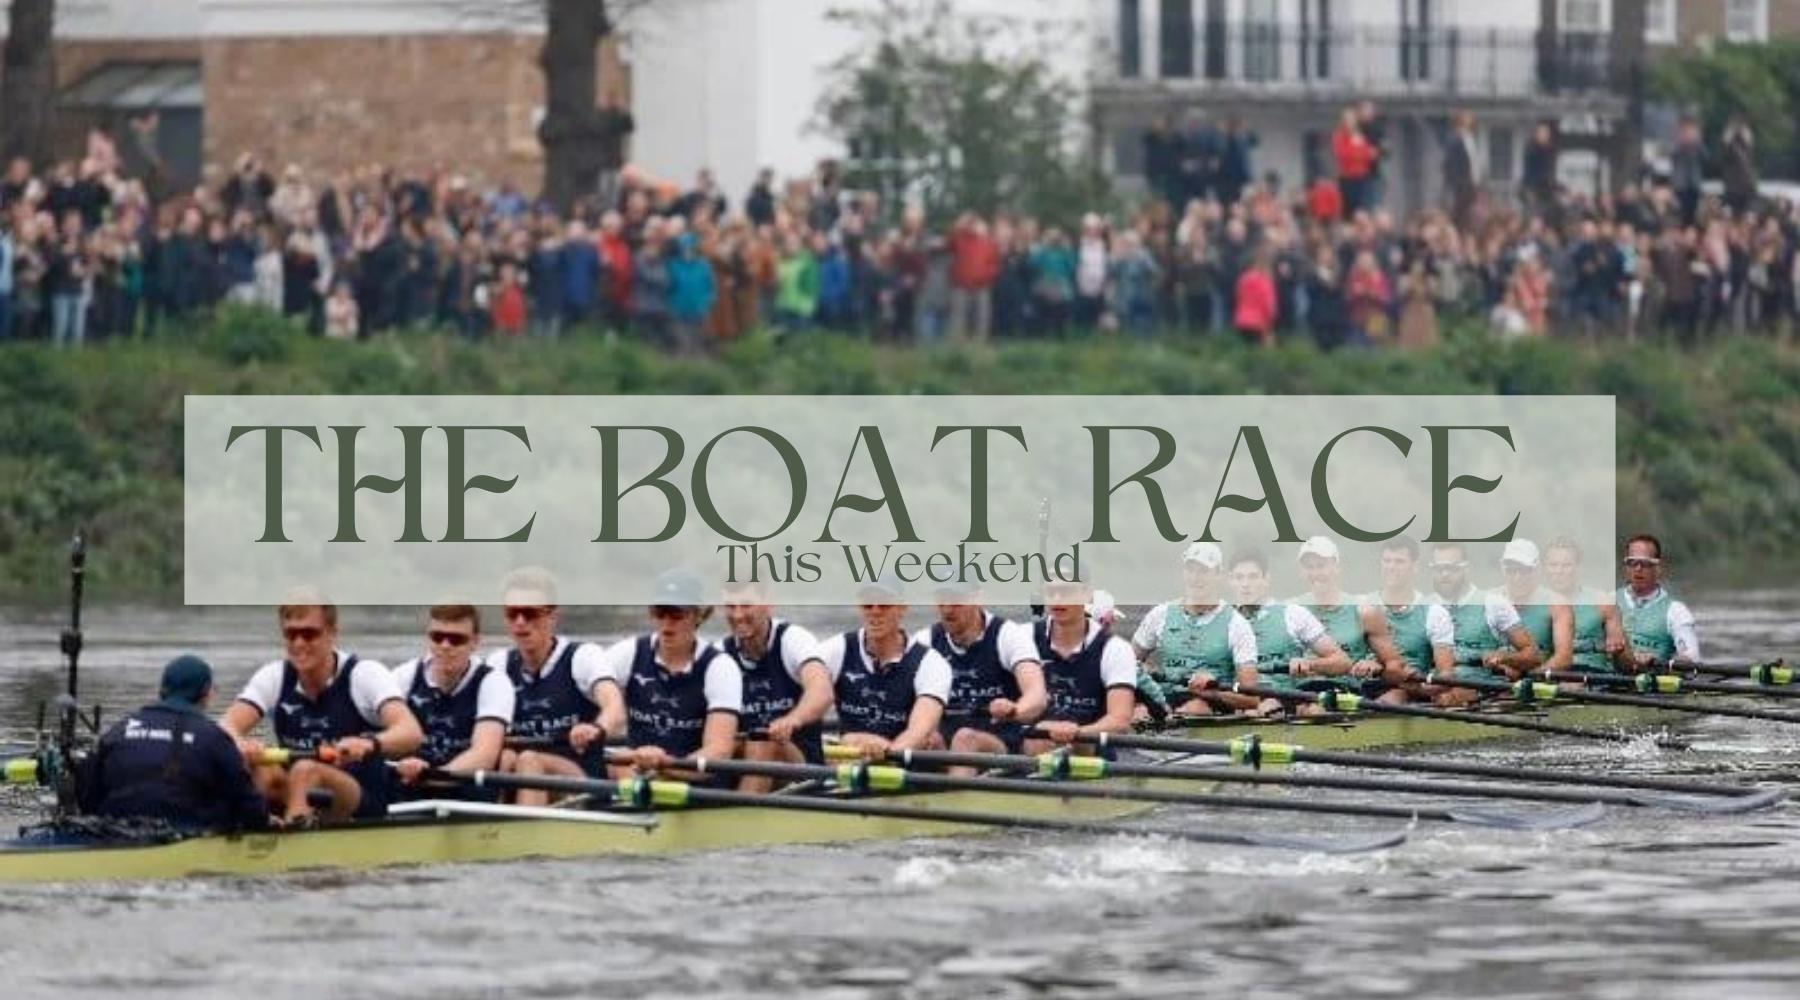 The Boat Race